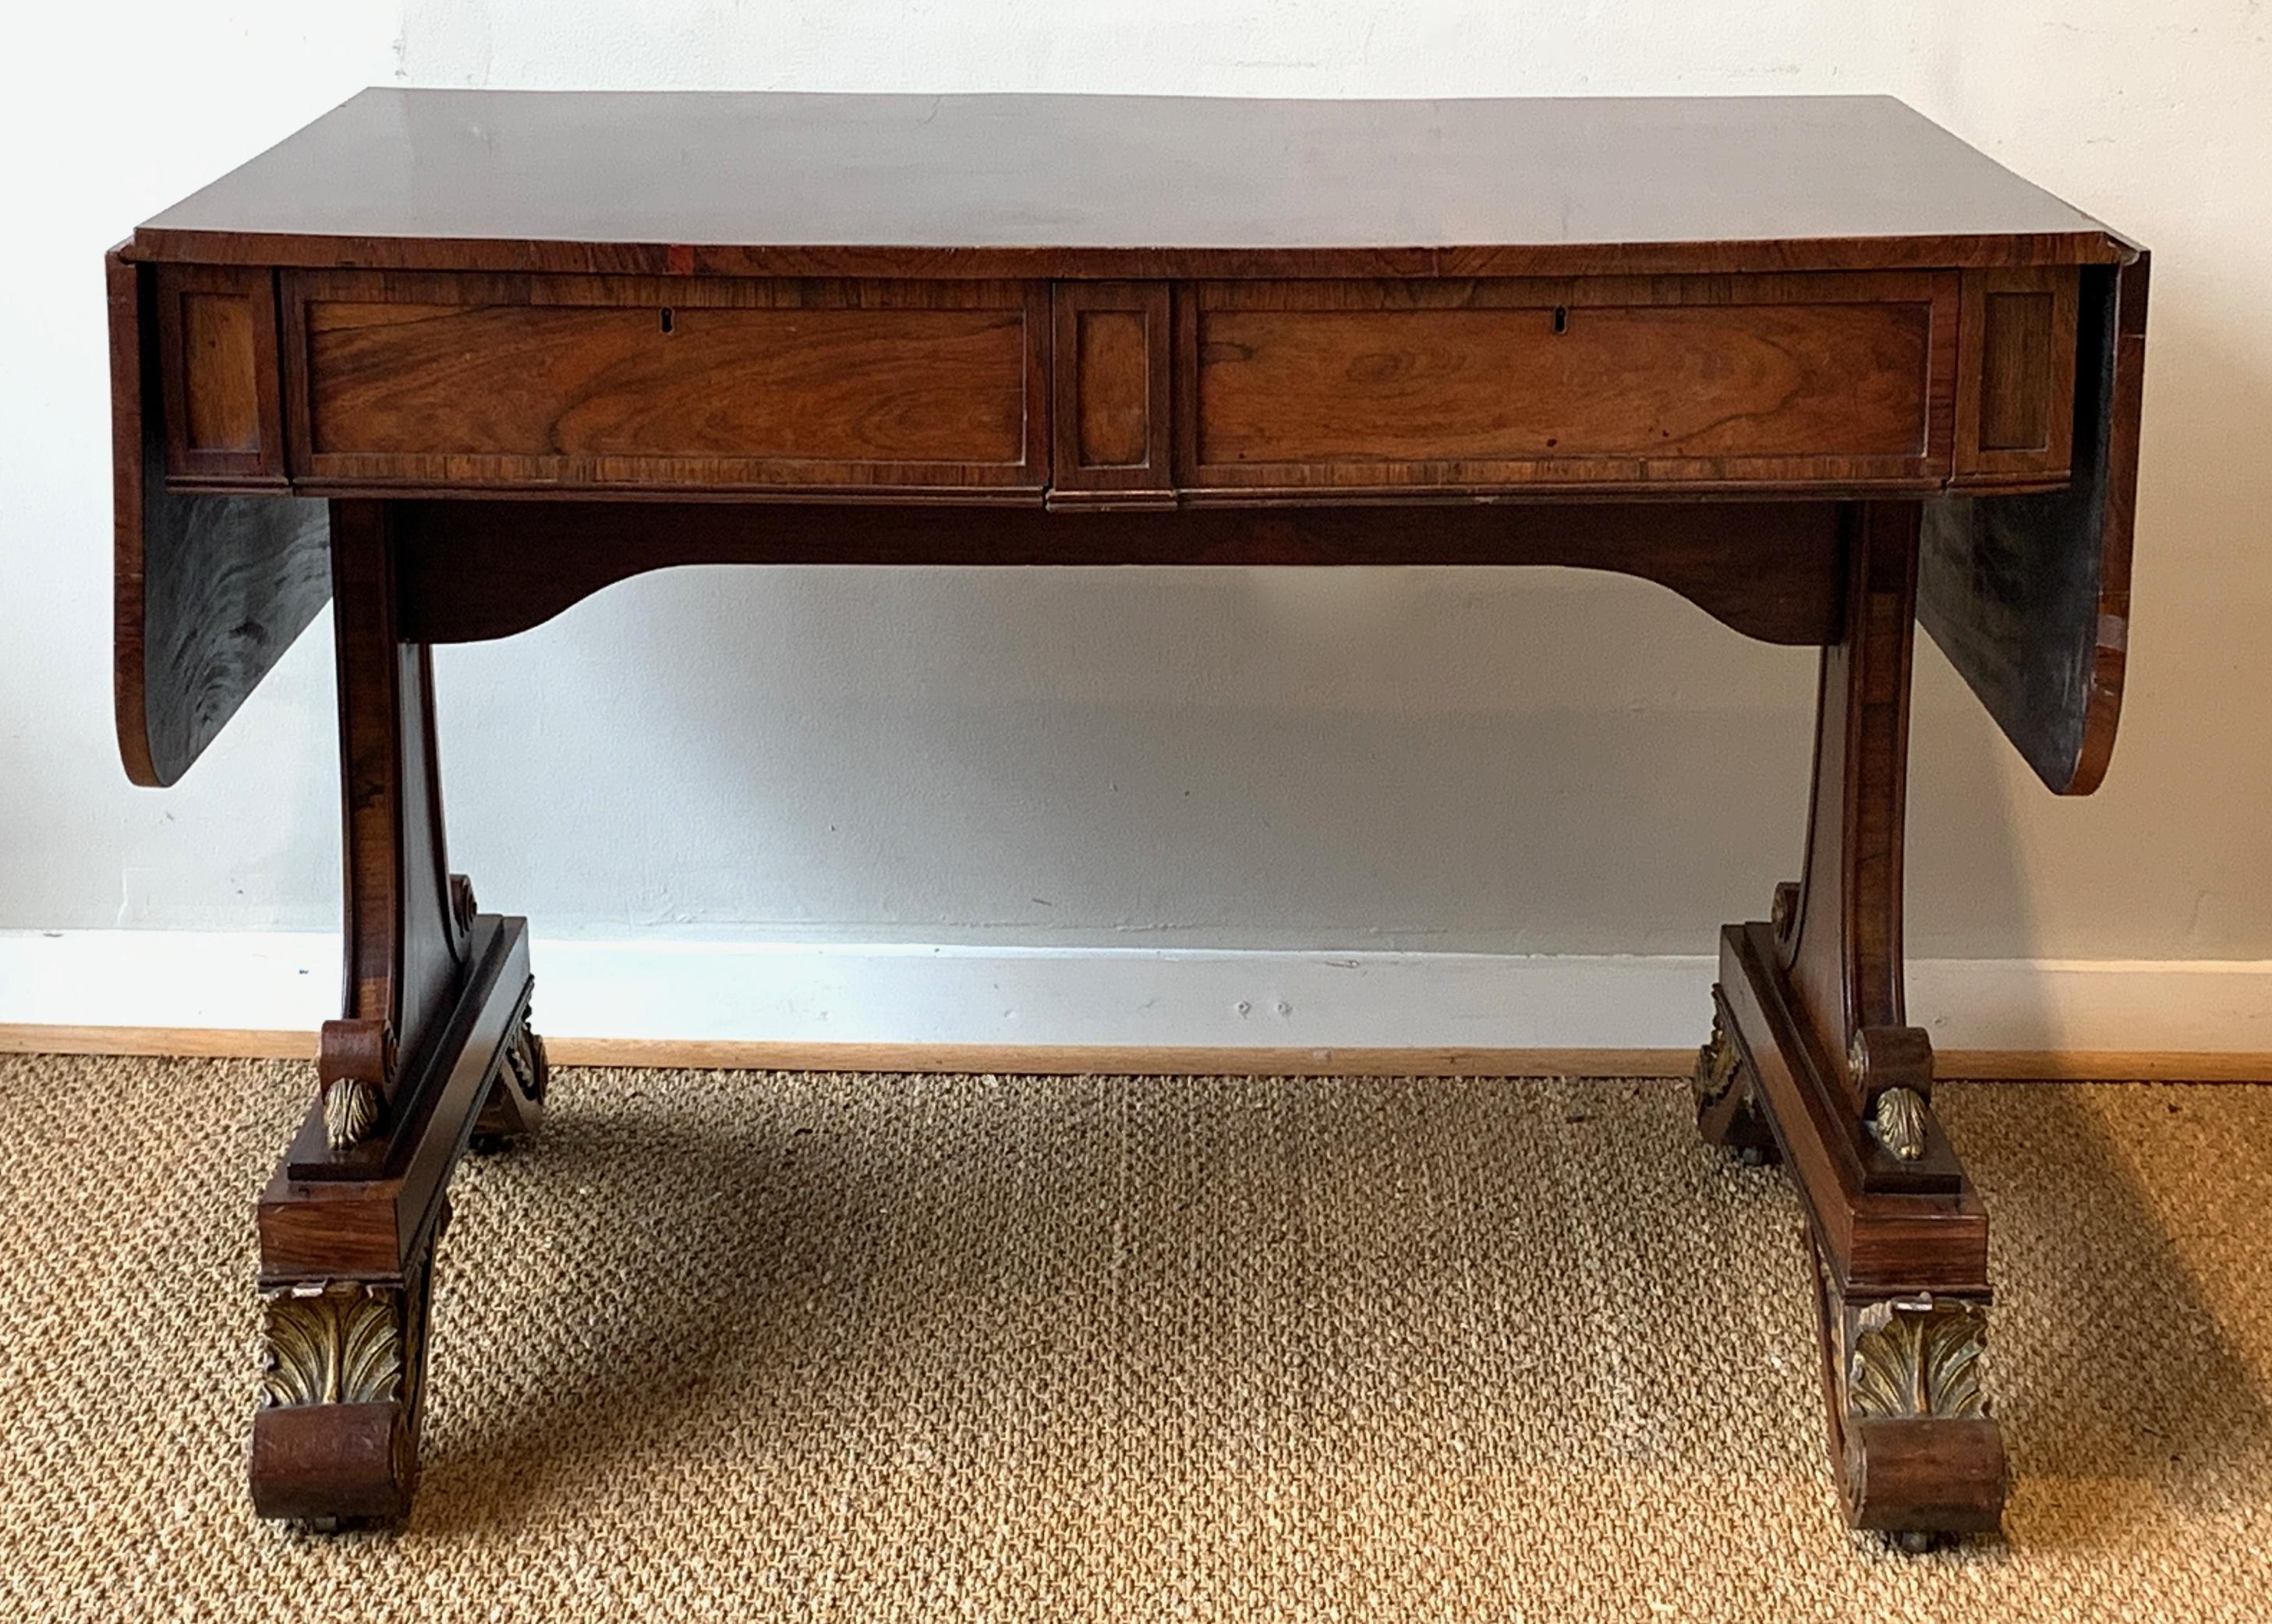 An exceptional early 19th century William IV sofa table attributed to Gillows. The beautifully figured, drop-leaf top above two concealed drawers and two dummy drawers resting on gently curving legs terminating in carved acanthus leaf and scrolled